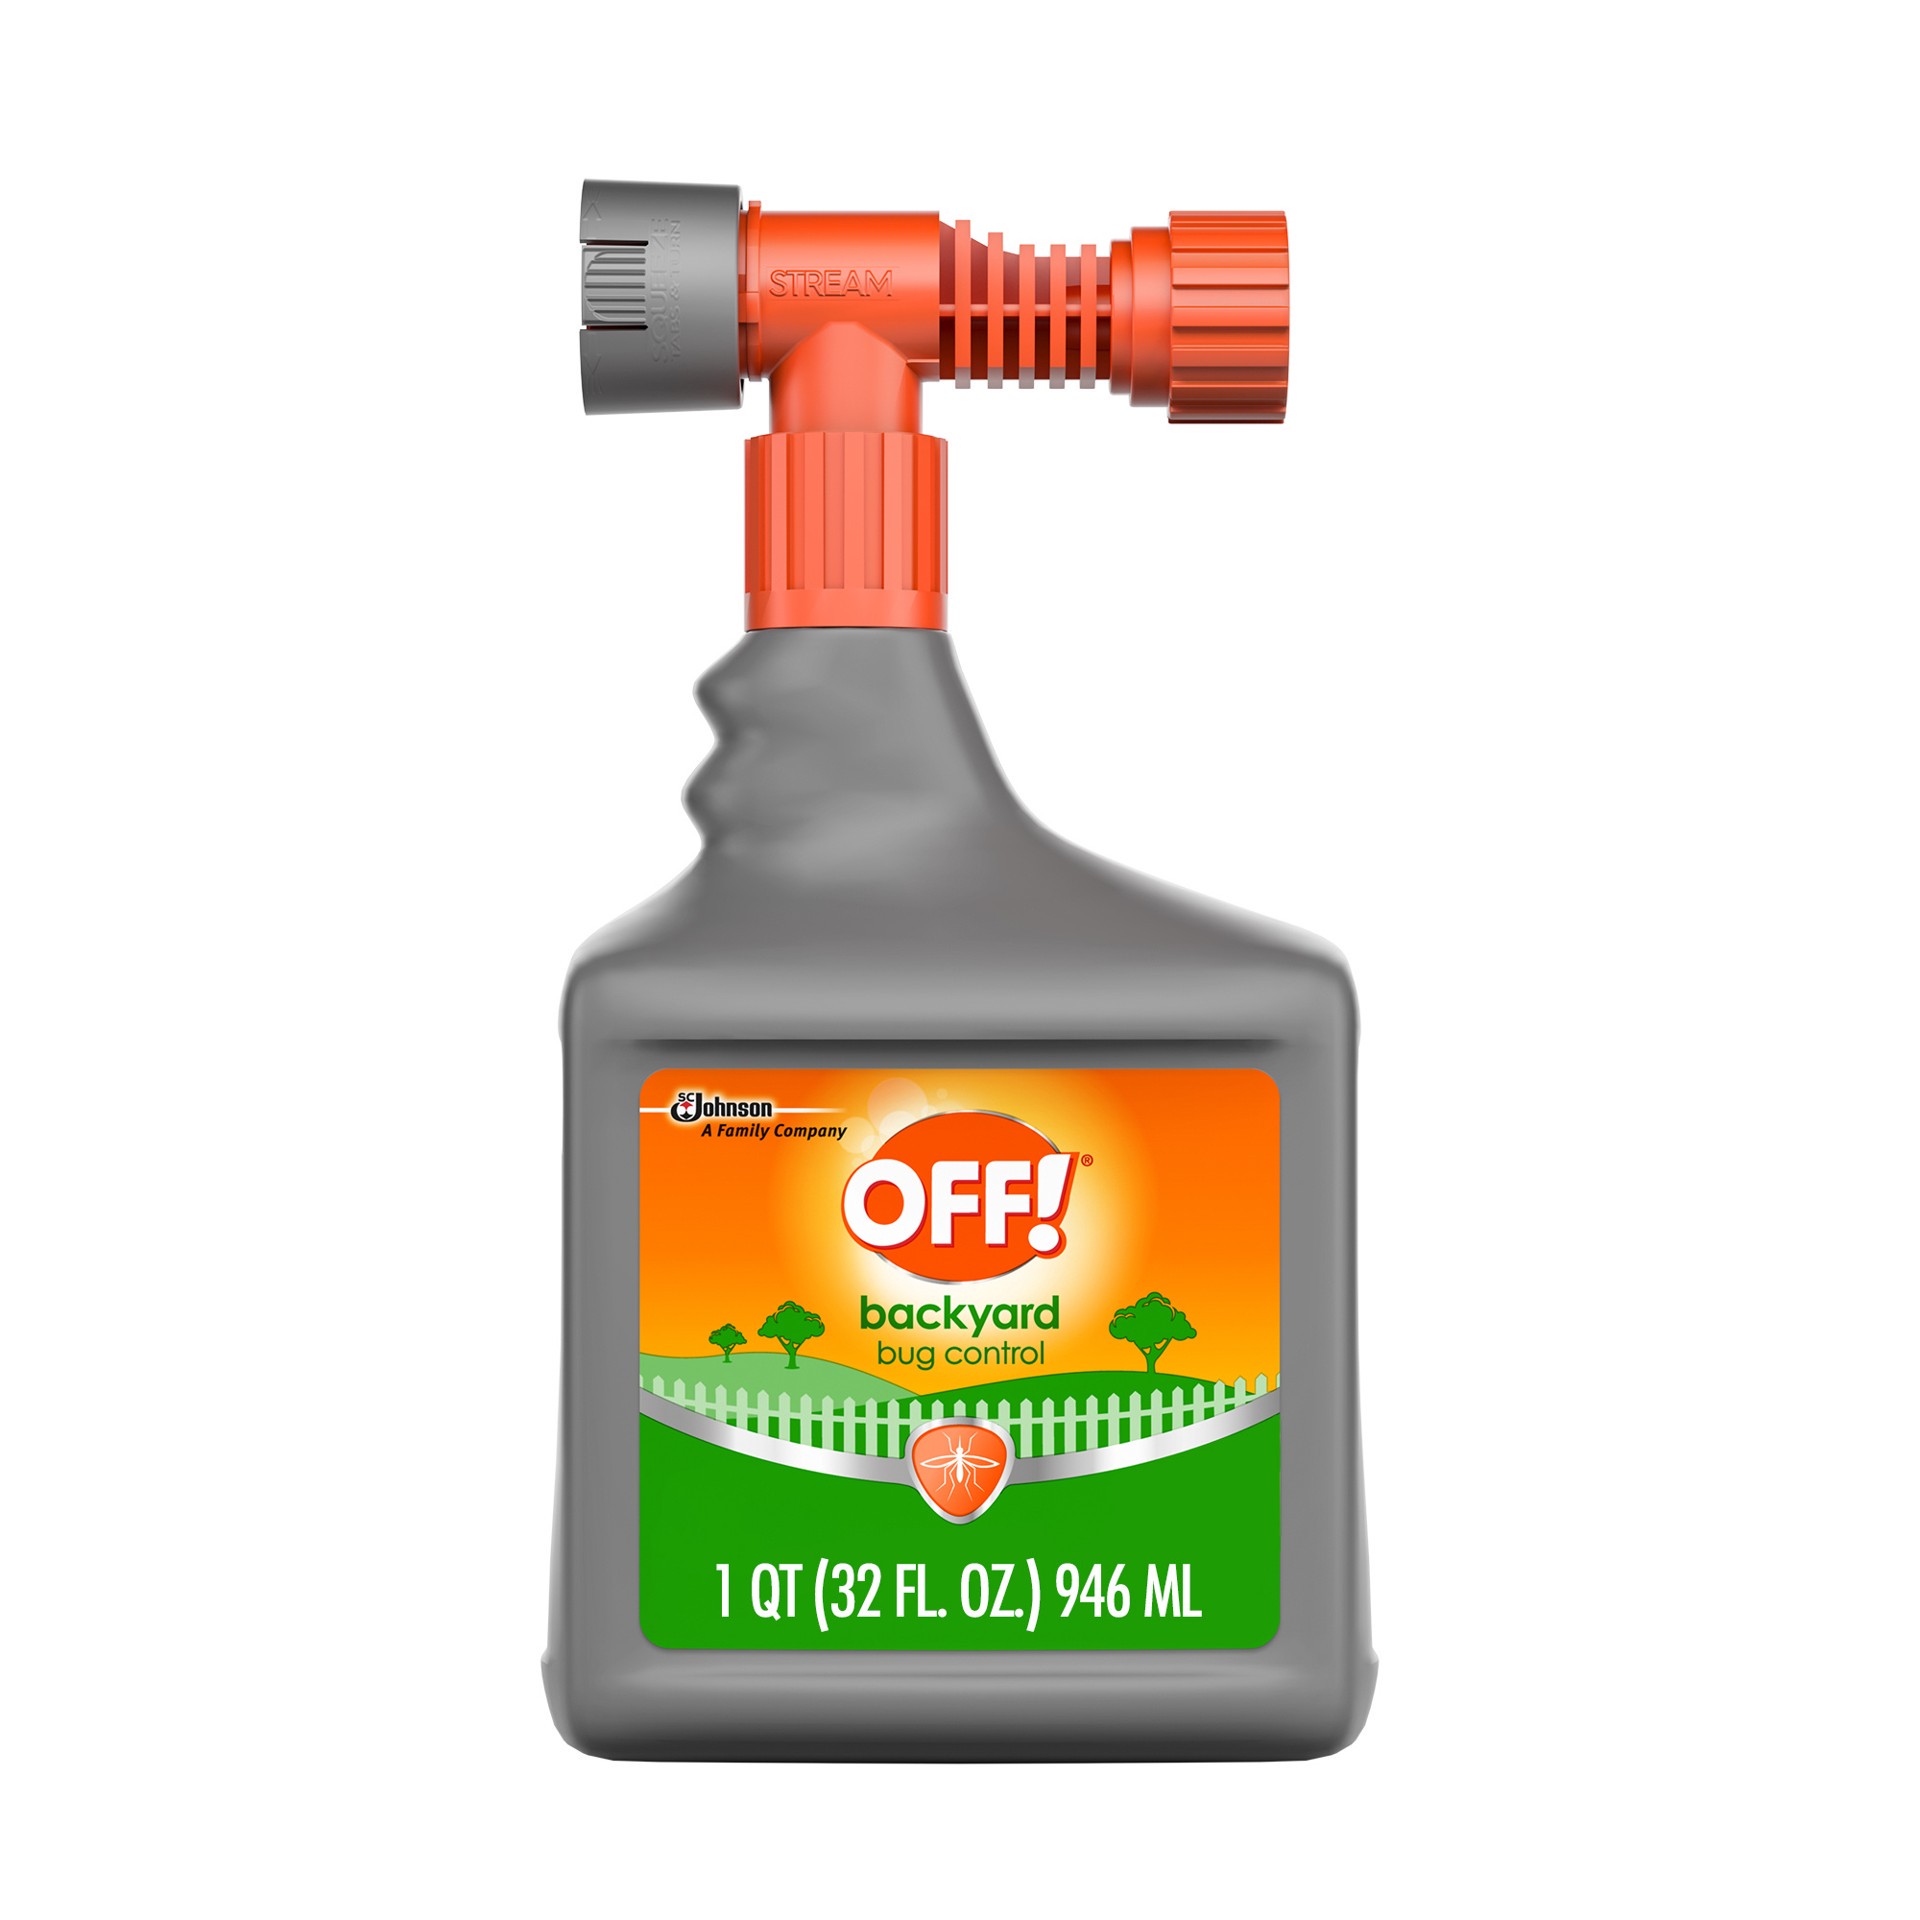 slide 4 of 5, OFF! Backyard Bug Control Pretreat, 32 oz, 1 CT, Outdoor Bug Treatment, Covers up to 16,000 sq. ft., Kills for up to 8 Weeks, With a Convenient Hose Connection, 32 fl oz